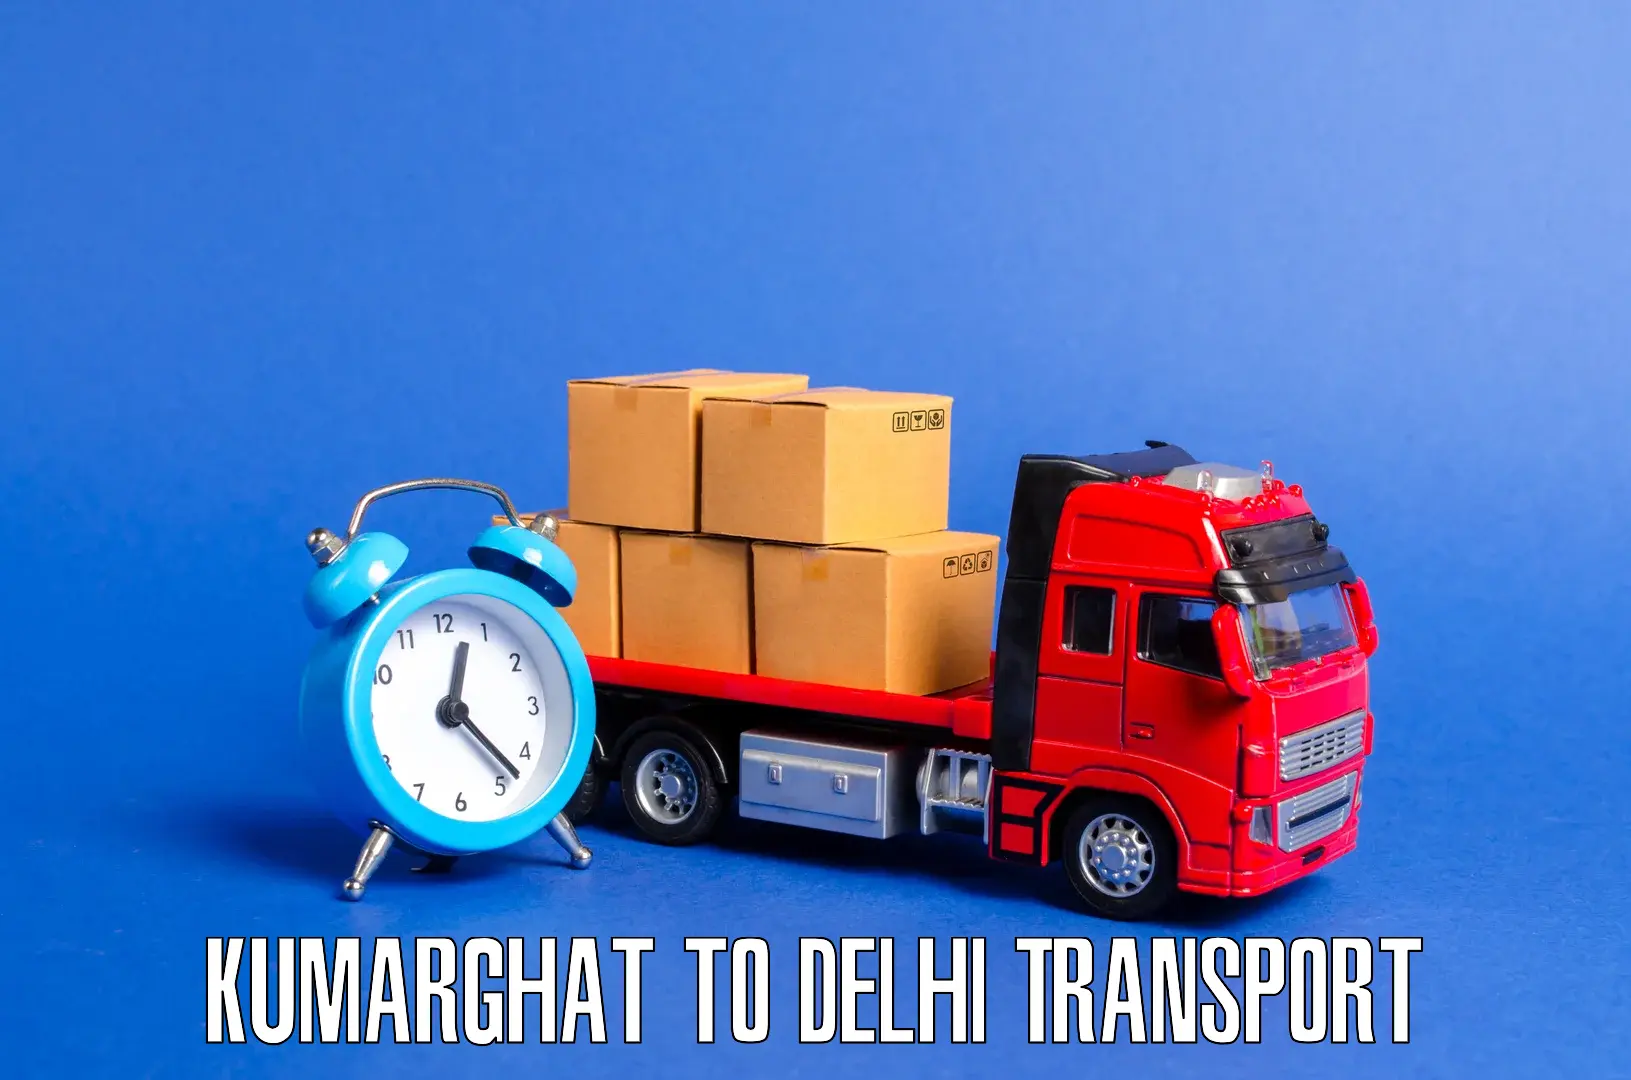 Lorry transport service Kumarghat to NCR